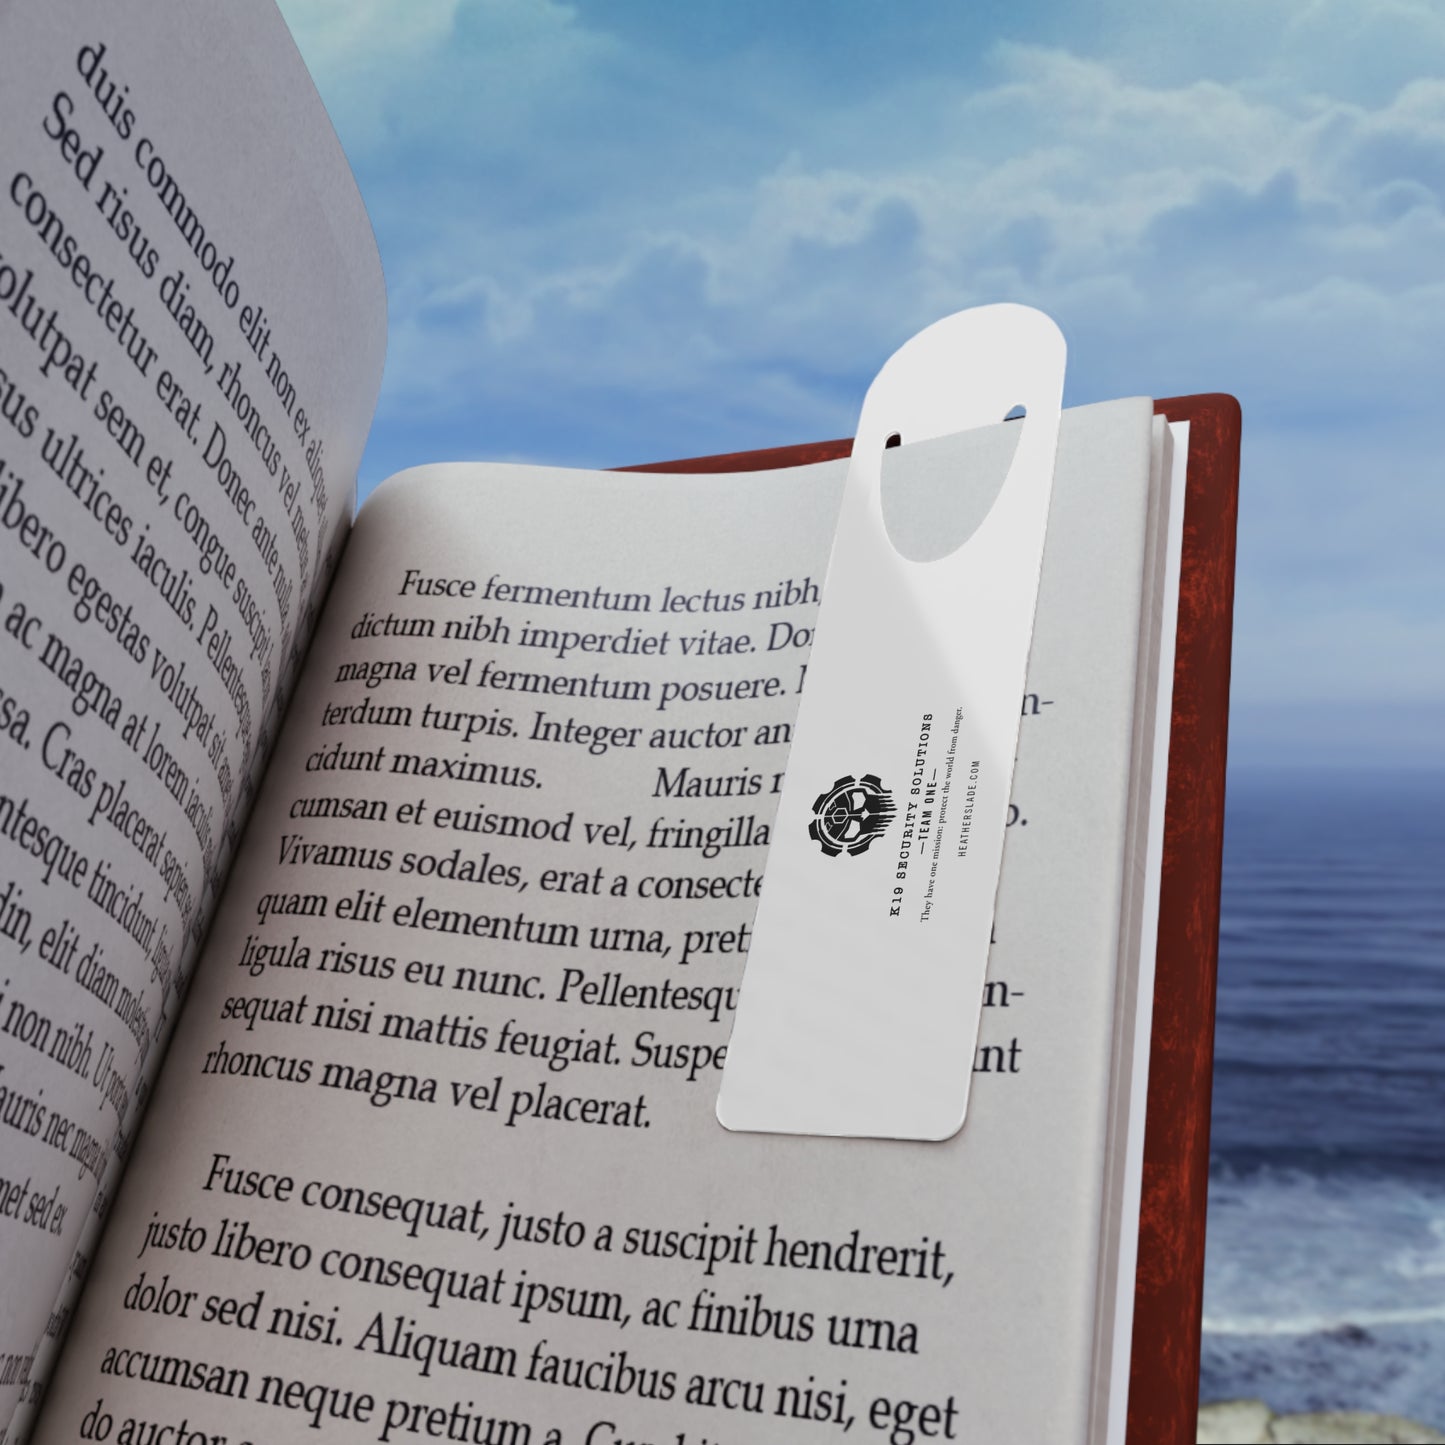 K19 Security Solutions Team One Bookmark